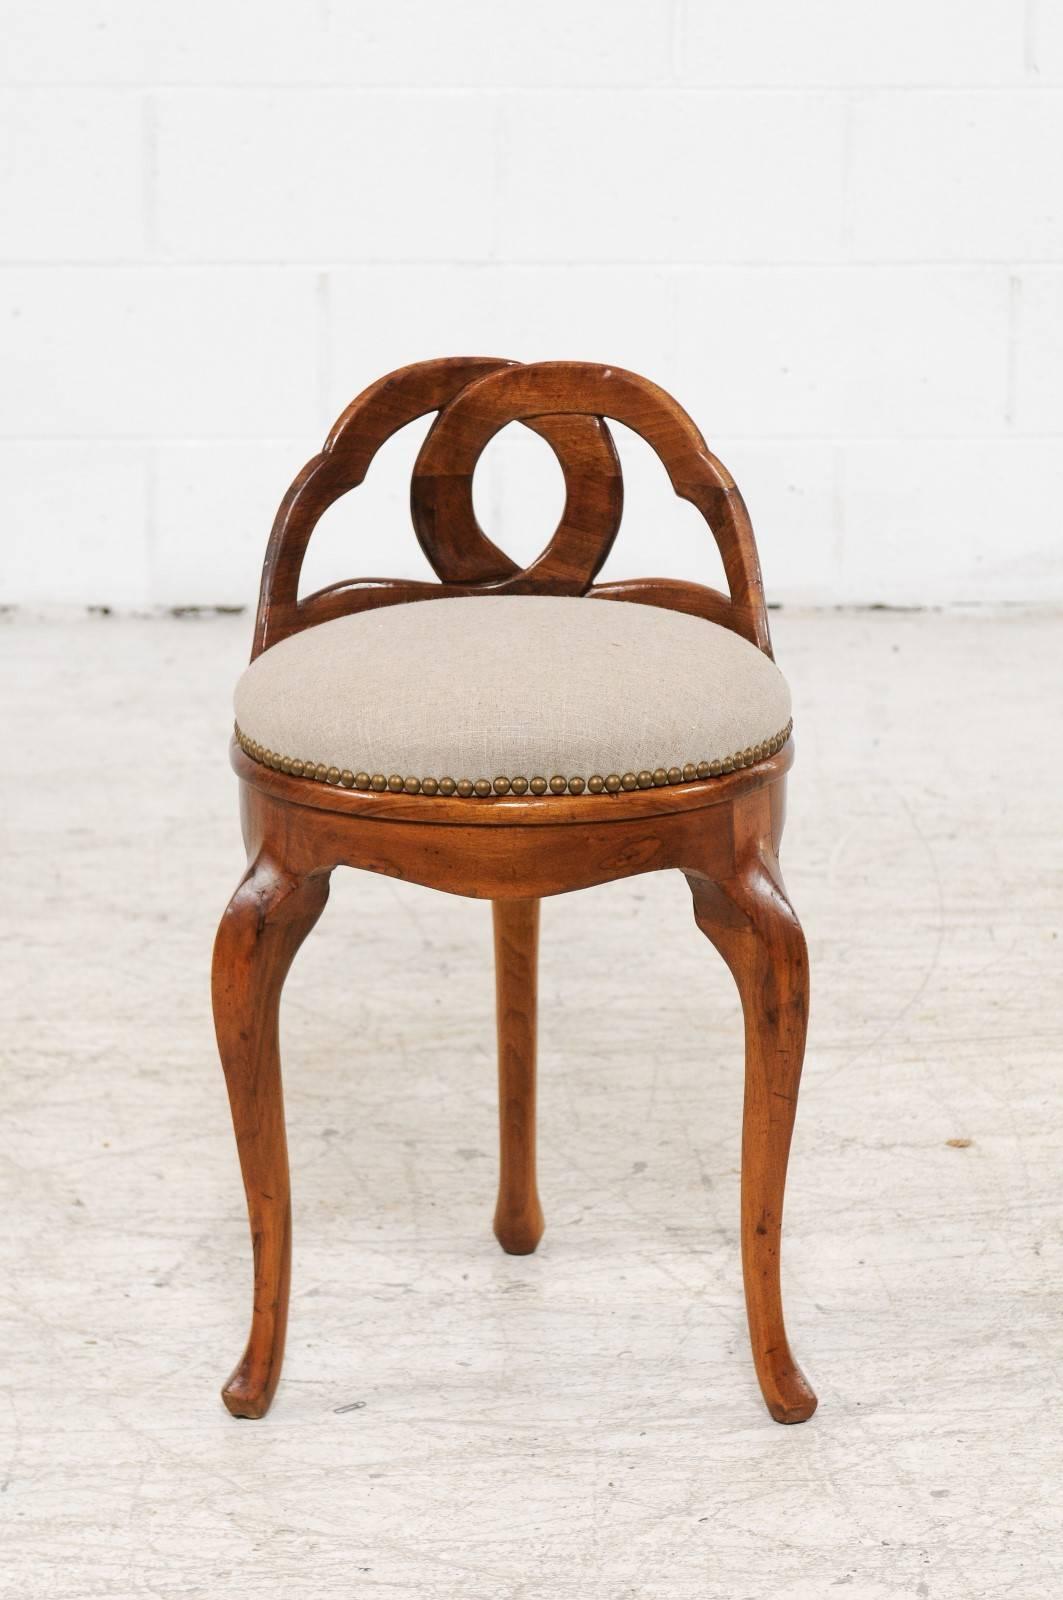 An Italian vintage round walnut upholstered stool with carved back and cabriole legs from the mid-20th century. This exquisite Italian walnut stool features an unusual carved back, made of two intertwining motifs. The circular seat has been